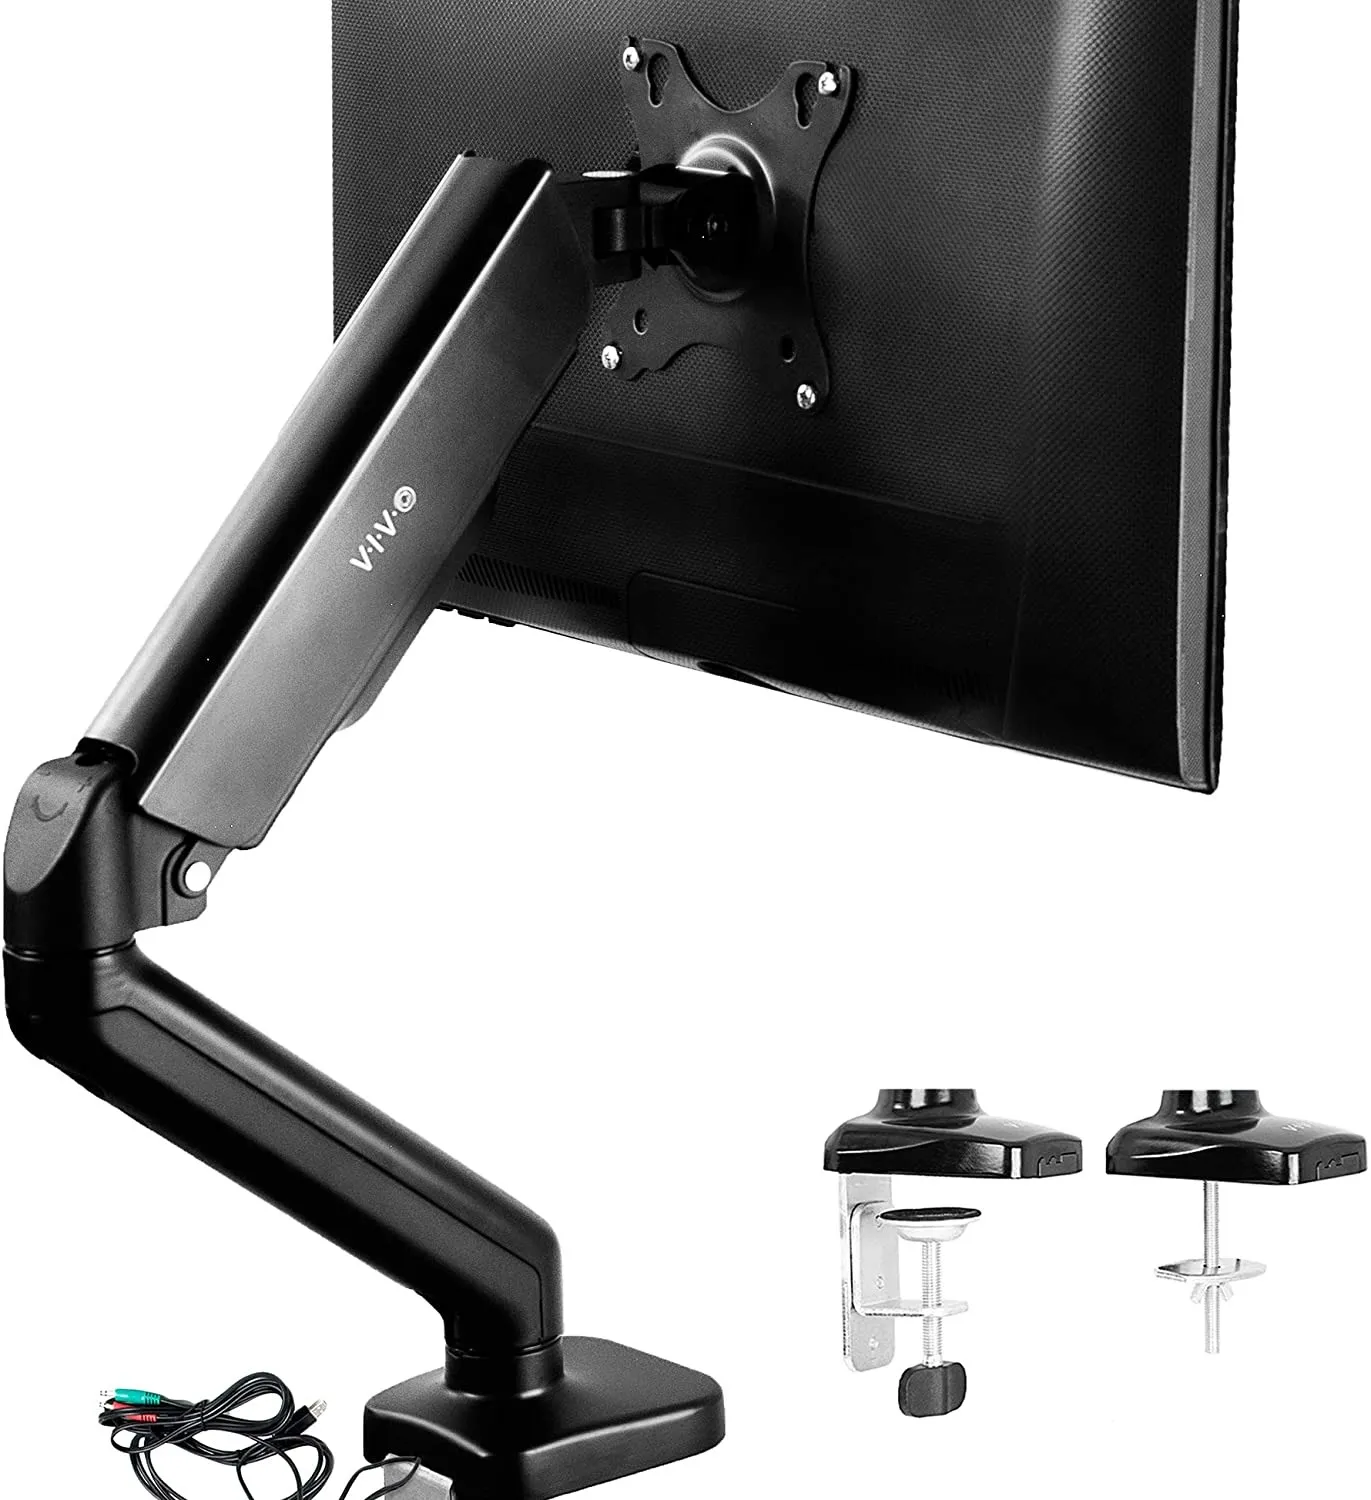 Single Monitor Height Adjustable Counterbalance Pneumatic Desk Mount Stand with USB and Audio Ports, Universal Fits Screens Up to 27 Inches (Stand-V001Ou)